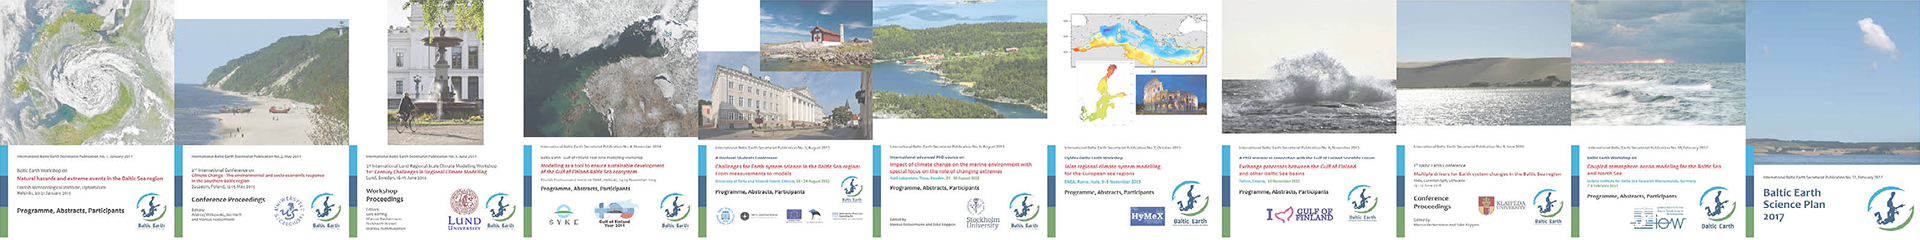 Baltic Earth - Publications Panorama